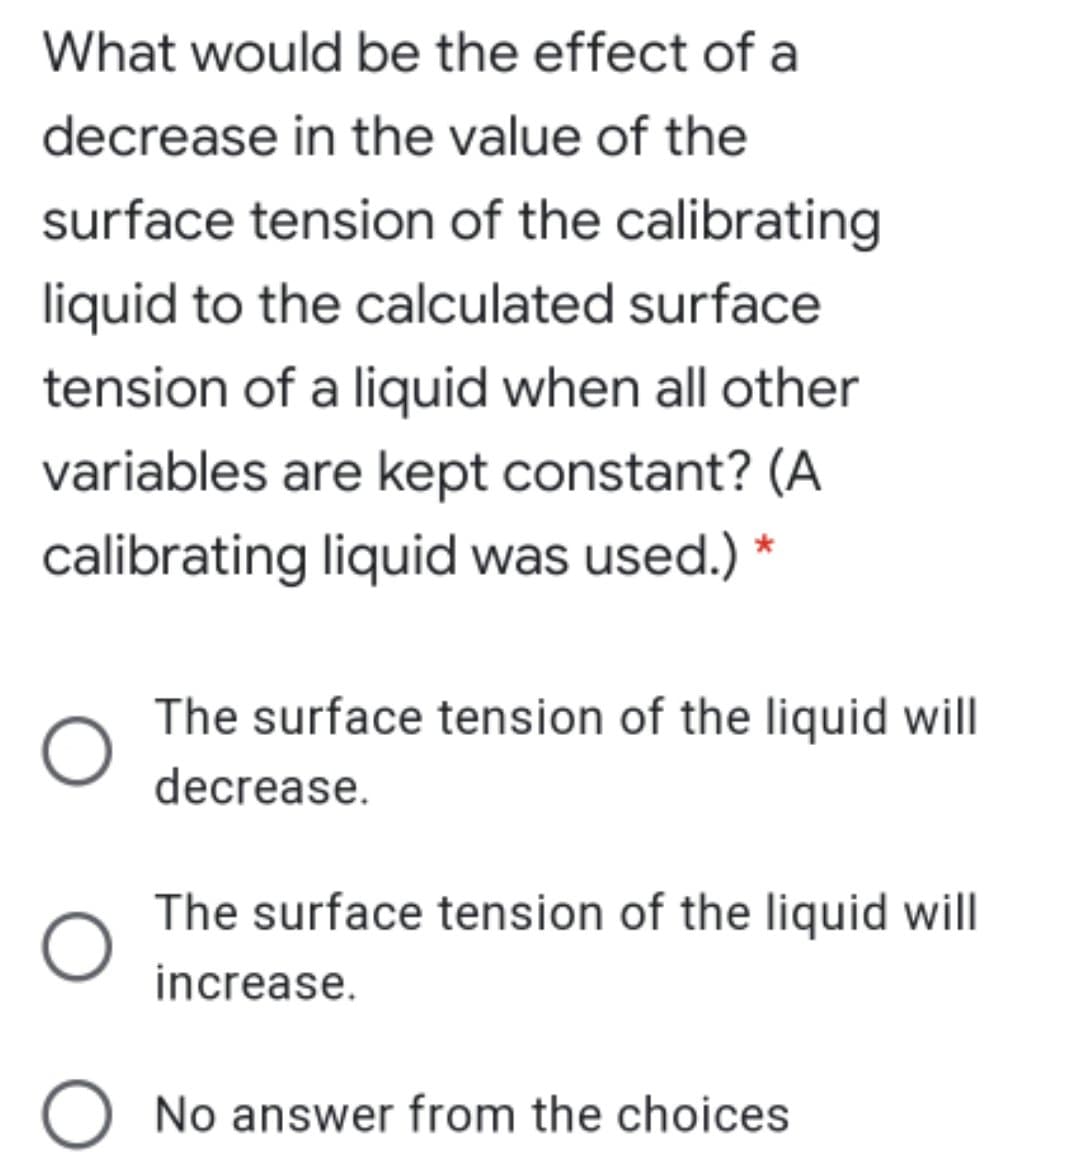 What would be the effect of a
decrease in the value of the
surface tension of the calibrating
liquid to the calculated surface
tension of a liquid when all other
variables are kept constant? (A
calibrating liquid was used.) *
The surface tension of the liquid will
decrease.
The surface tension of the liquid will
increase.
O No answer from the choices
